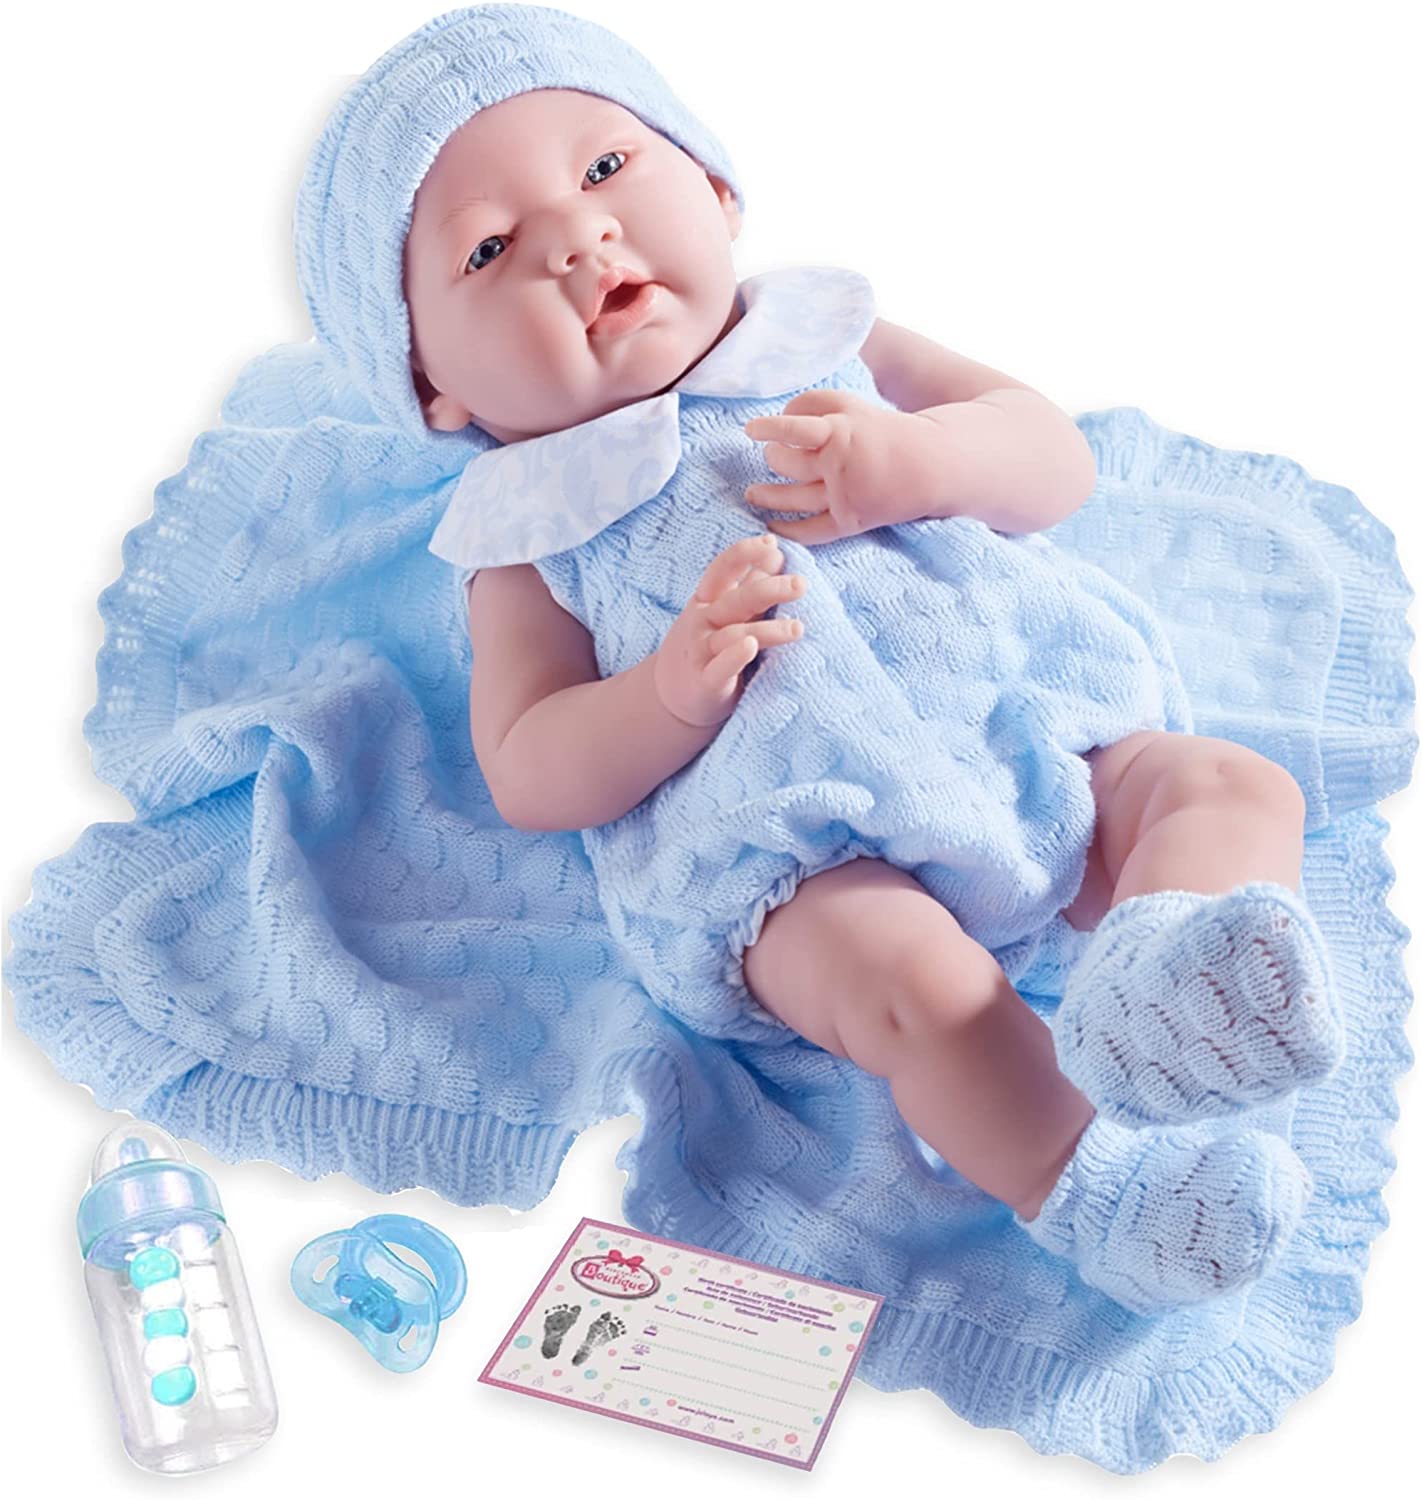 15" La Newborn Doll In Blue Knit Outfit With Blanket Real Boy!